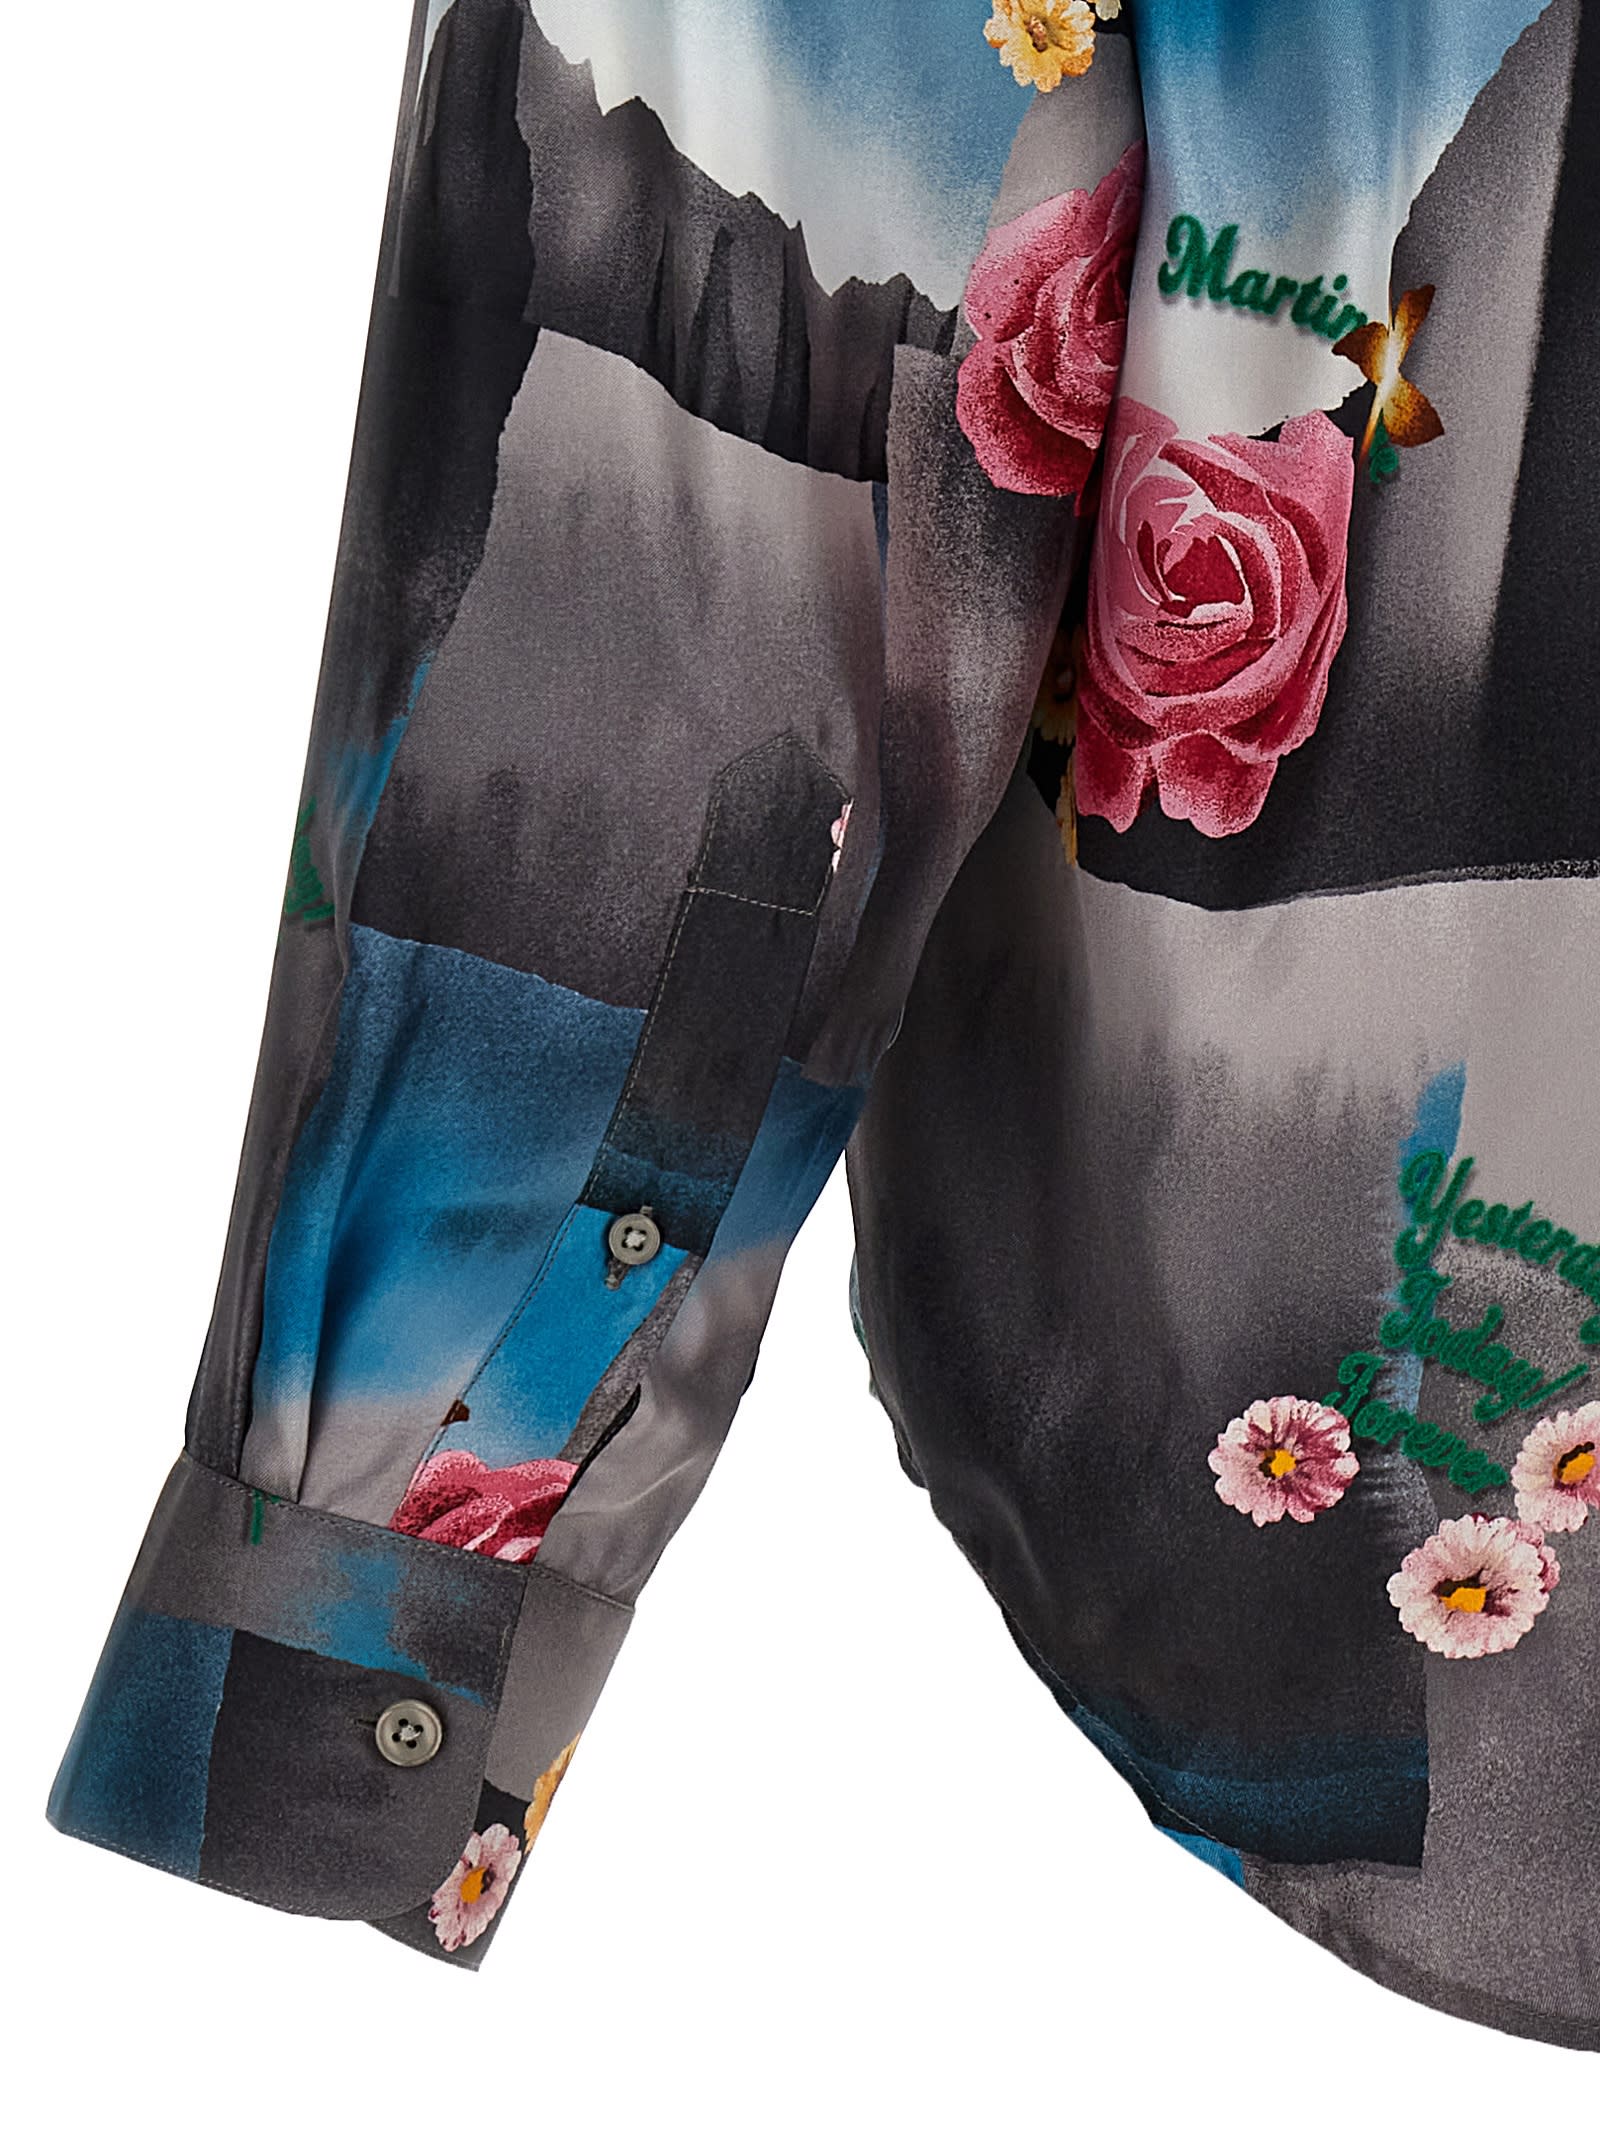 Shop Martine Rose Today Floral Shirt In Multicolor